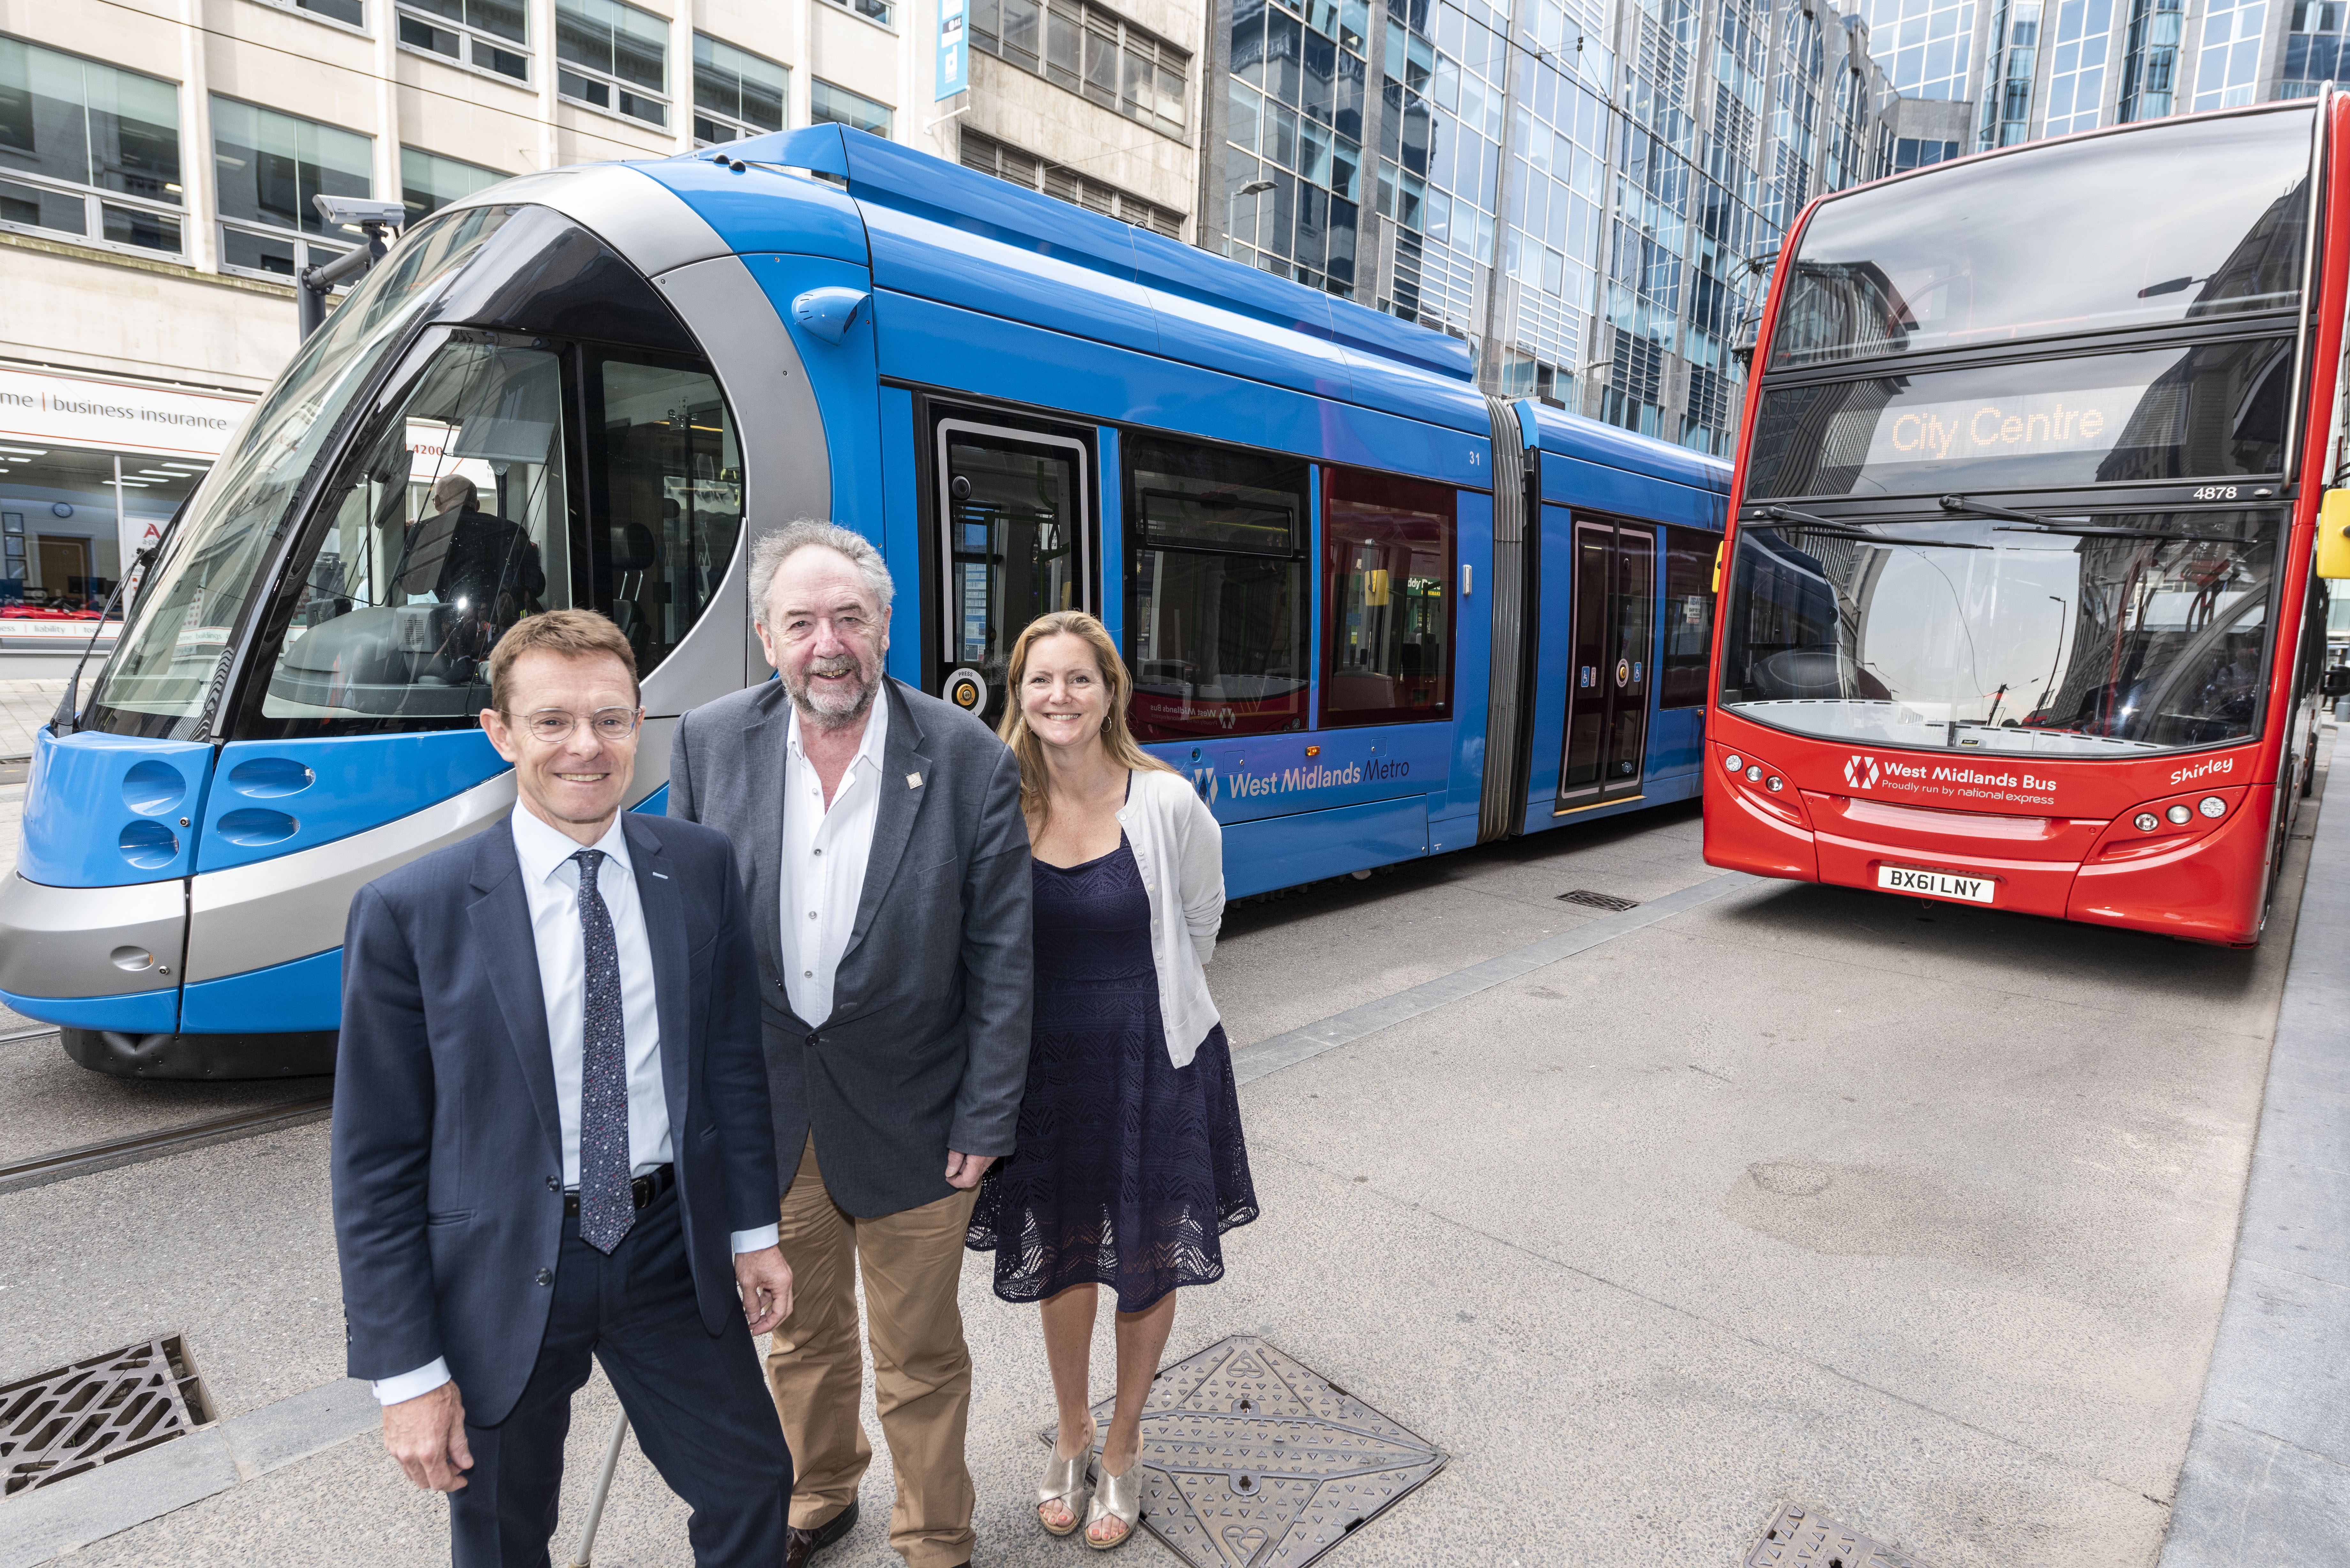 Andy Street, left, Cllr Roger Lawrence and Laura Shoaf with a tram and bus in their new West Midlands Transport livery.